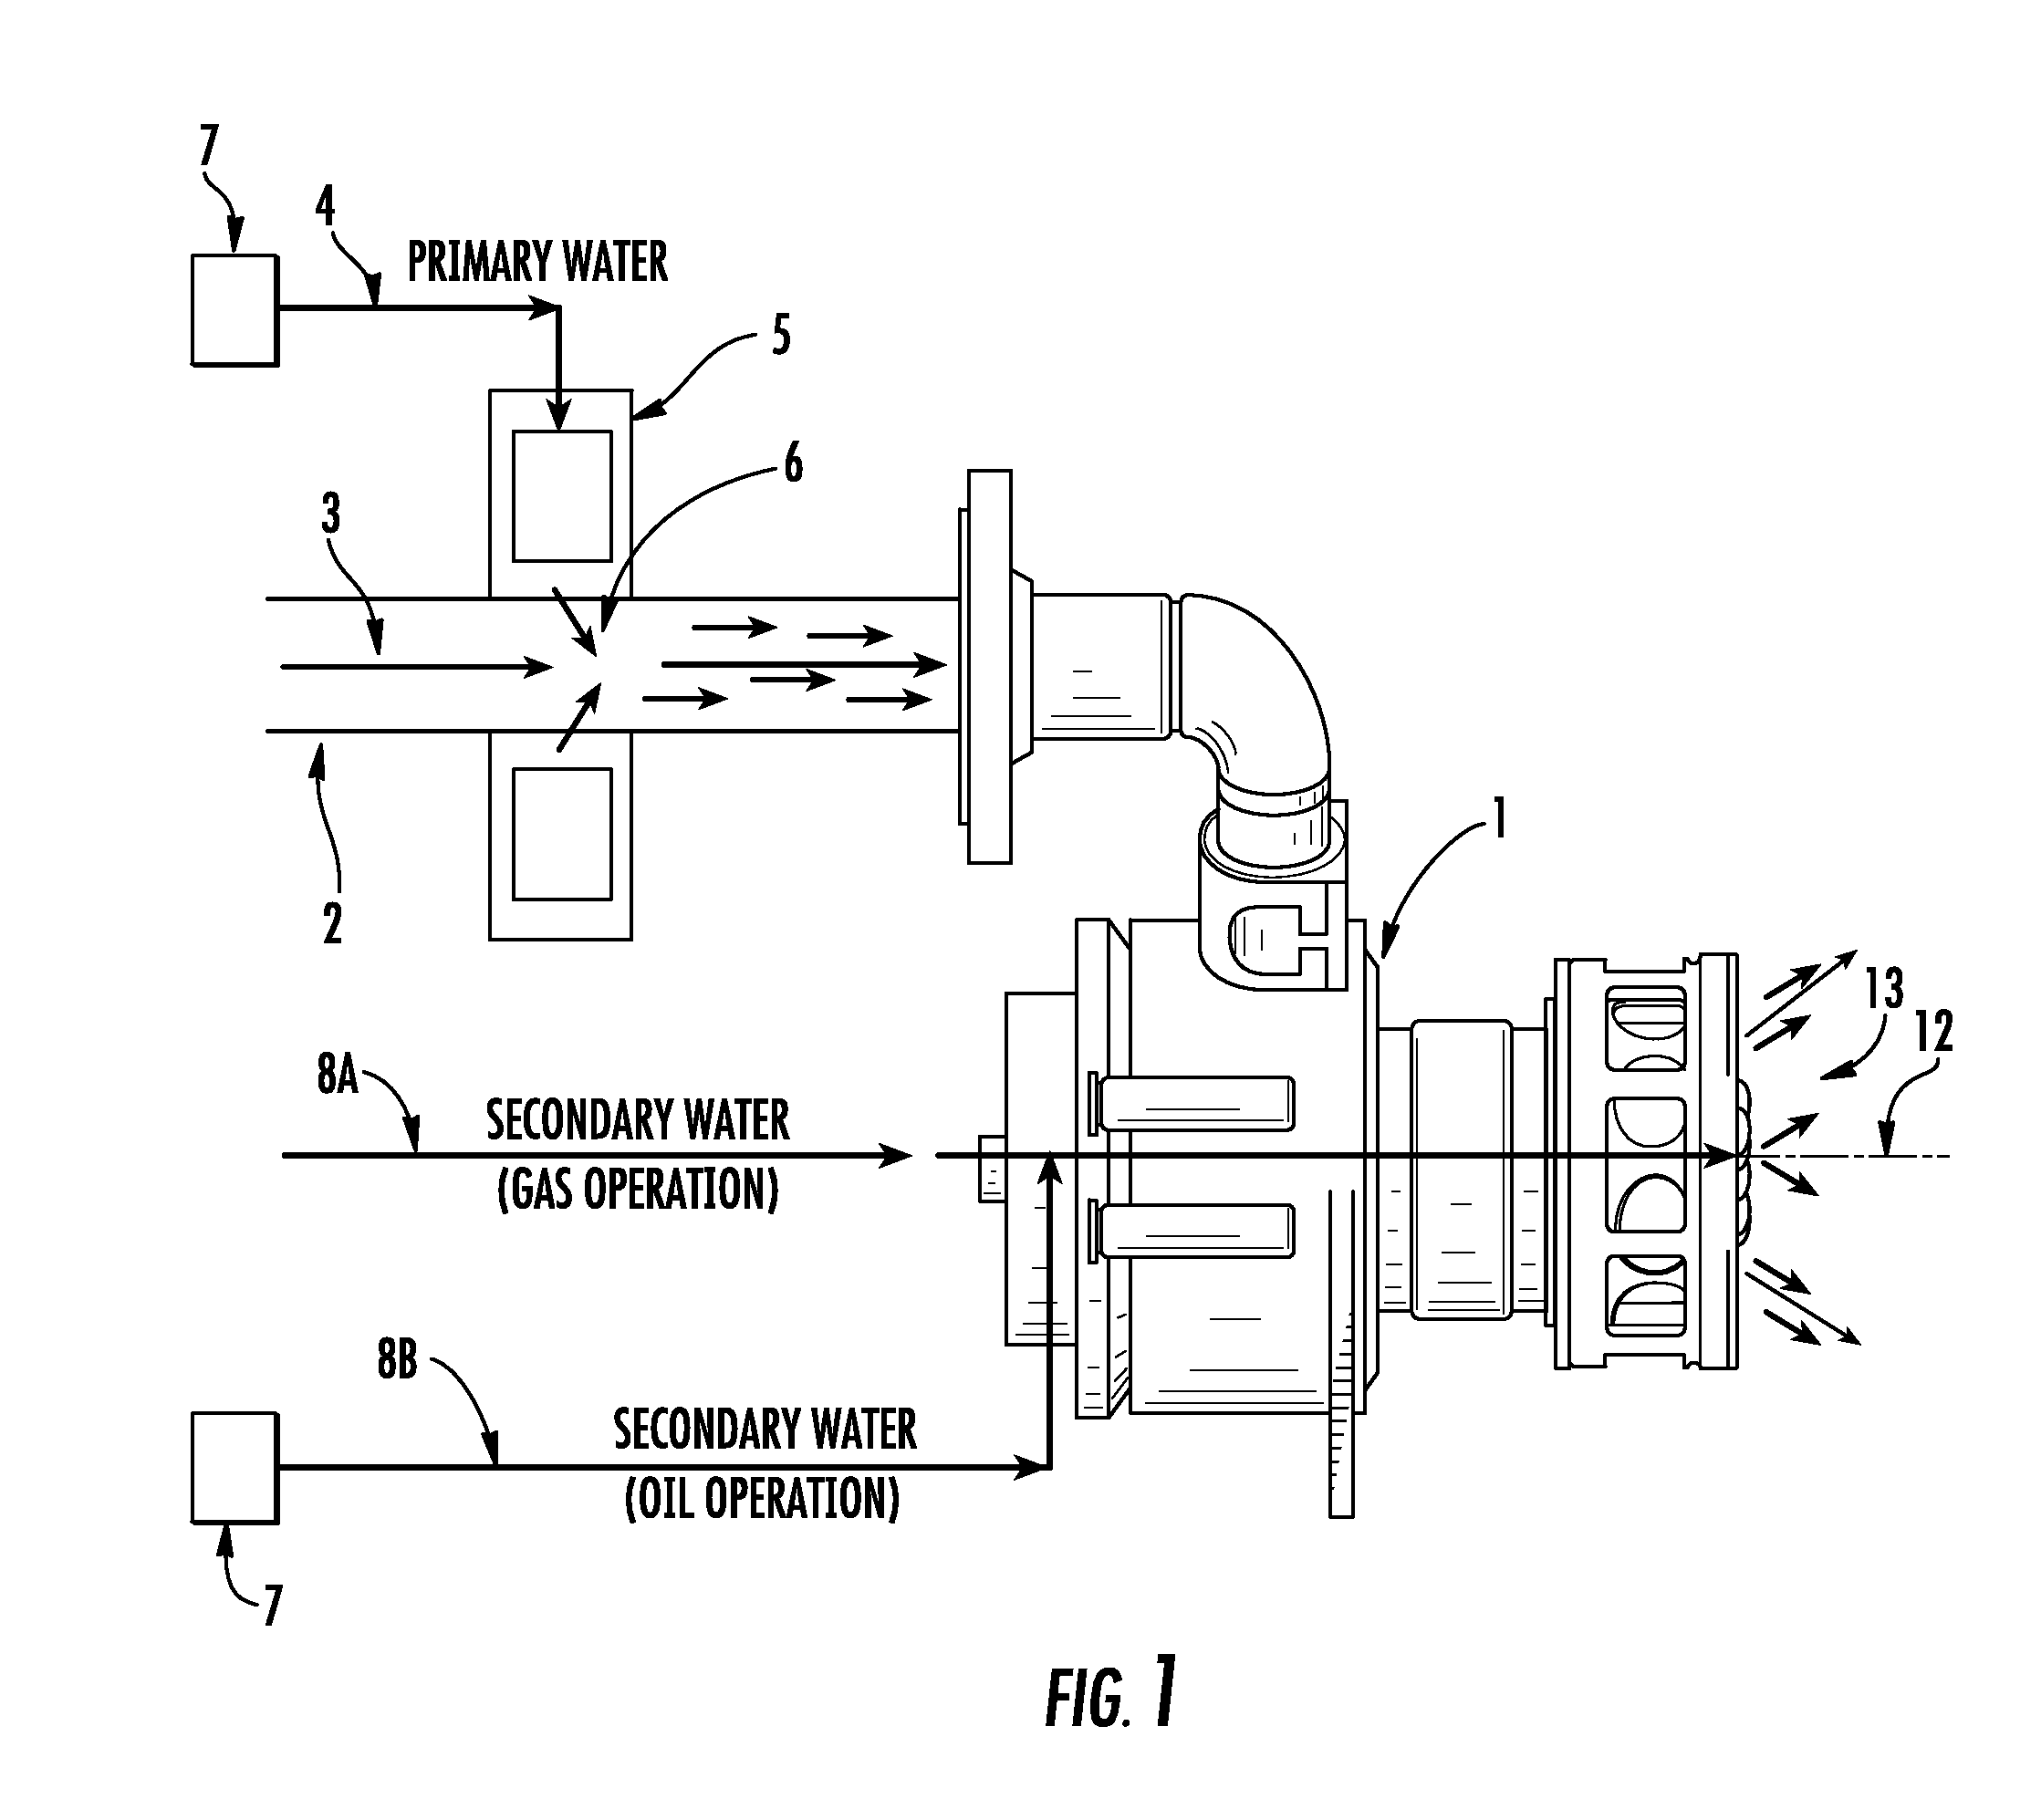 Secondary water injection for diffusion combustion systems